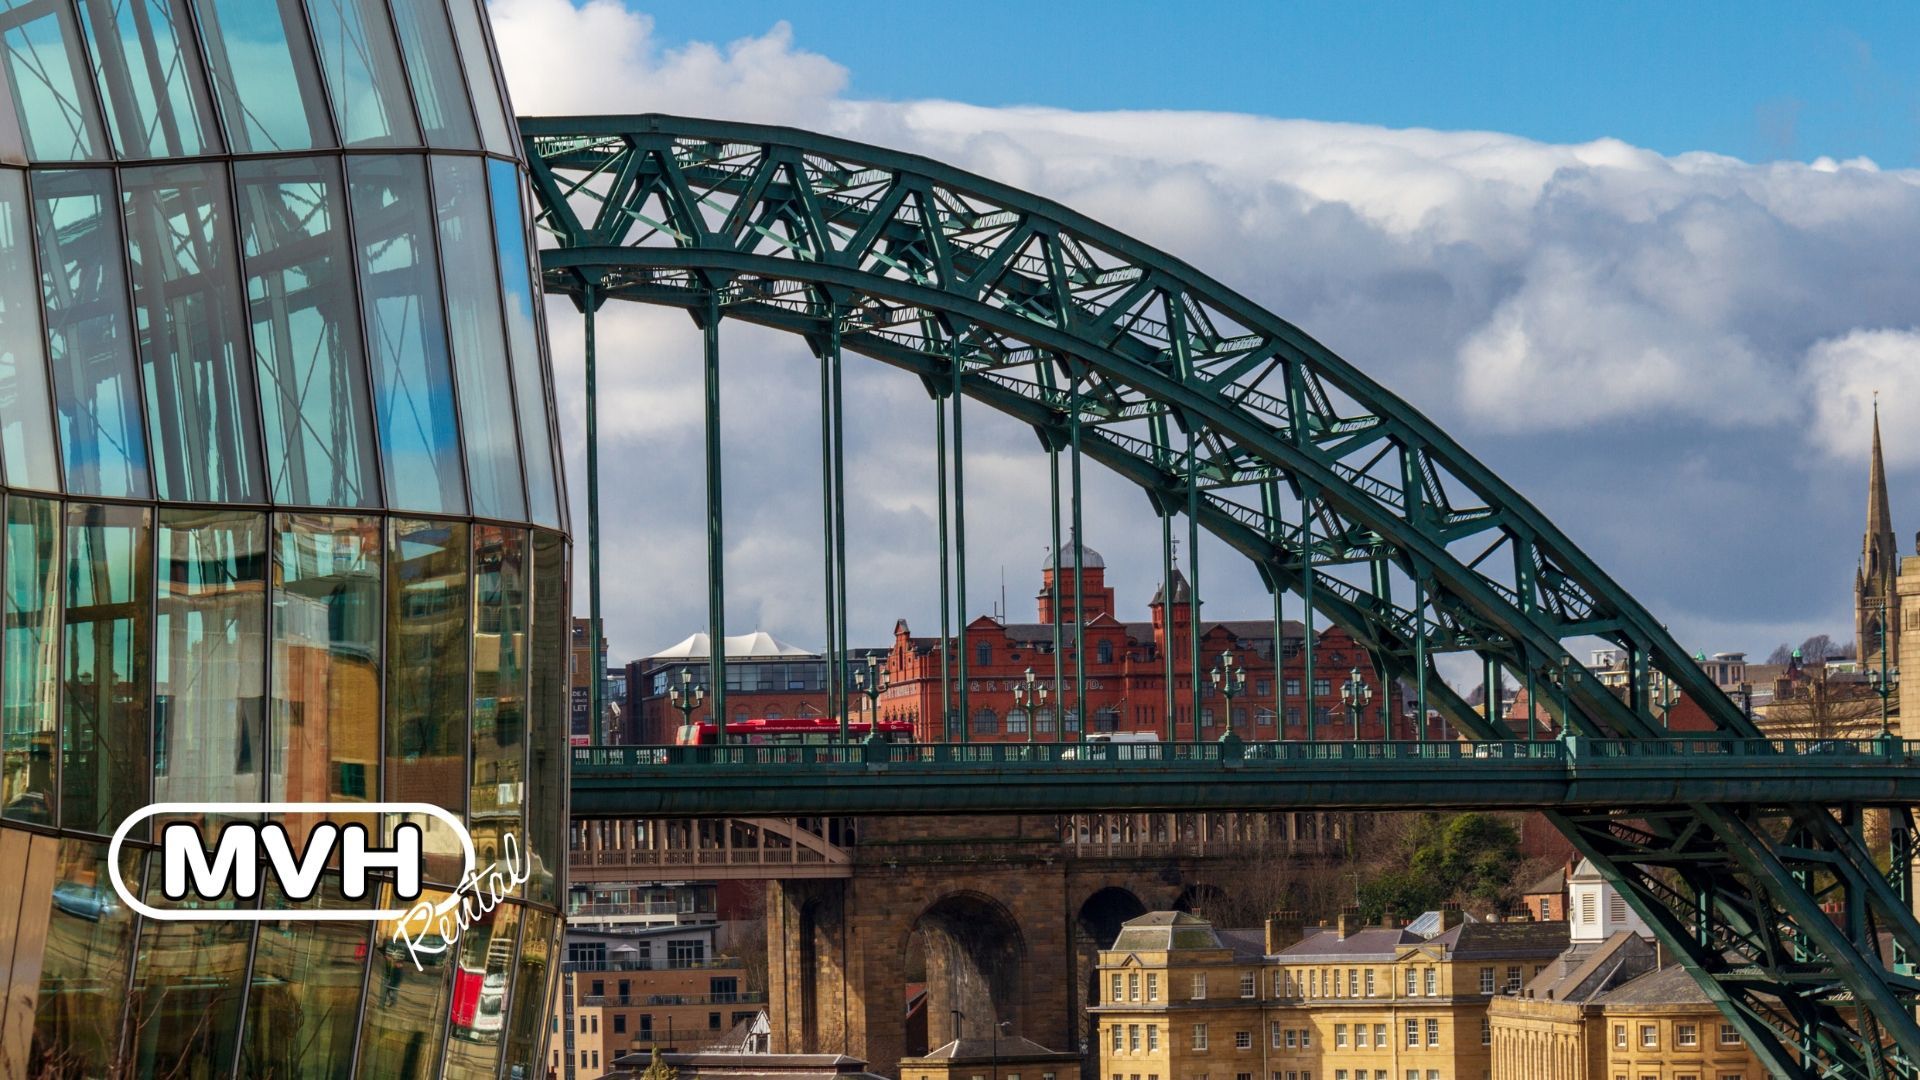 Visiting Newcastle upon Tyne for the first time? Brush up on your Geordie lingo and history in our guide.
